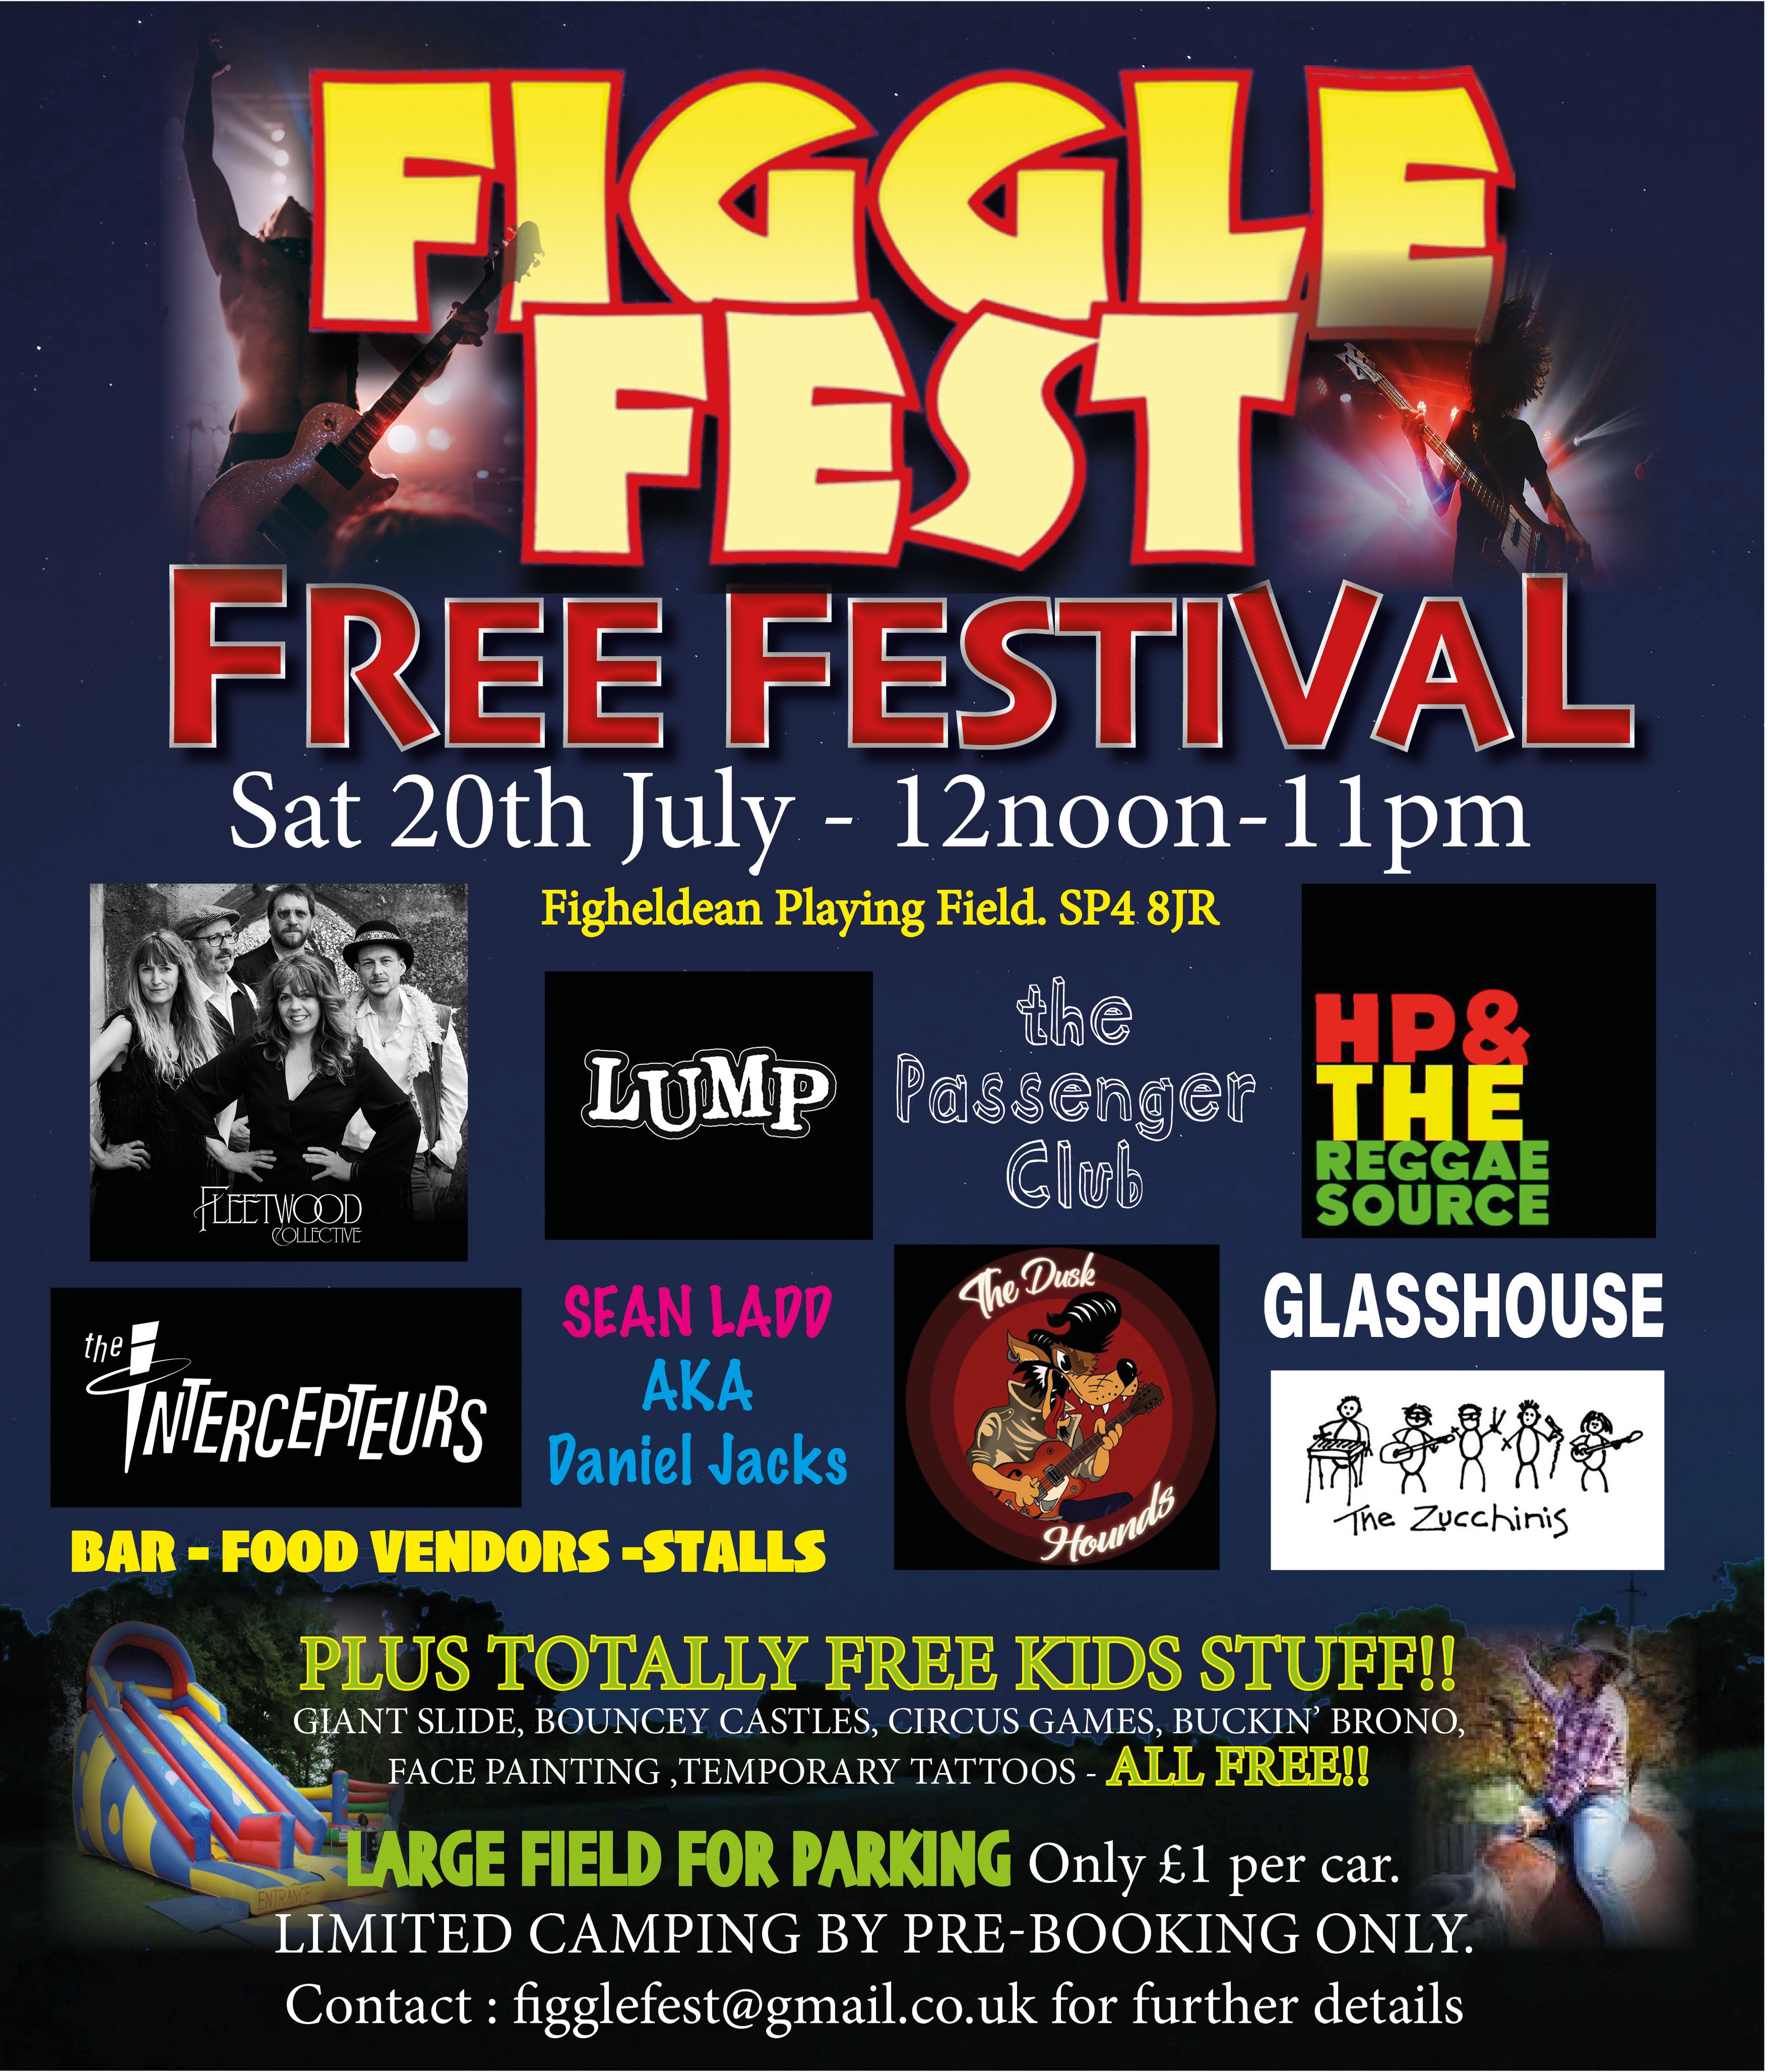 Figgle Fest - Fleetwood Collective + The Intercepteurs + HP &amp; The Reggae Source + Passenger Club + LUMP + The Zucchinis + Glasshouse